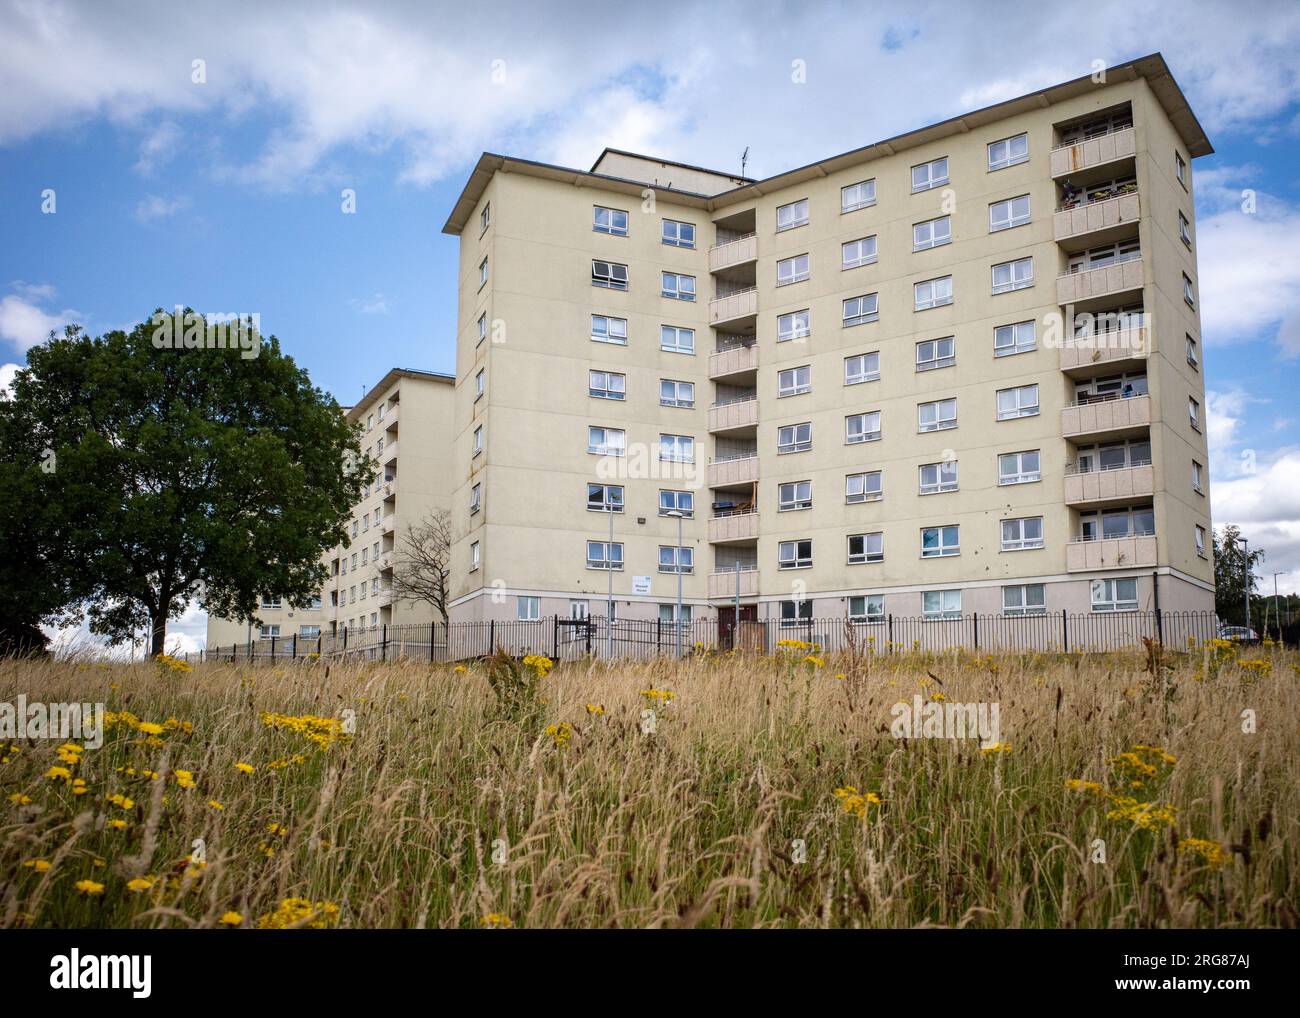 8-Storey council tower blocks in Bradford, 1960's architecture, UK social housing, High Rise flats England. Stock Photo